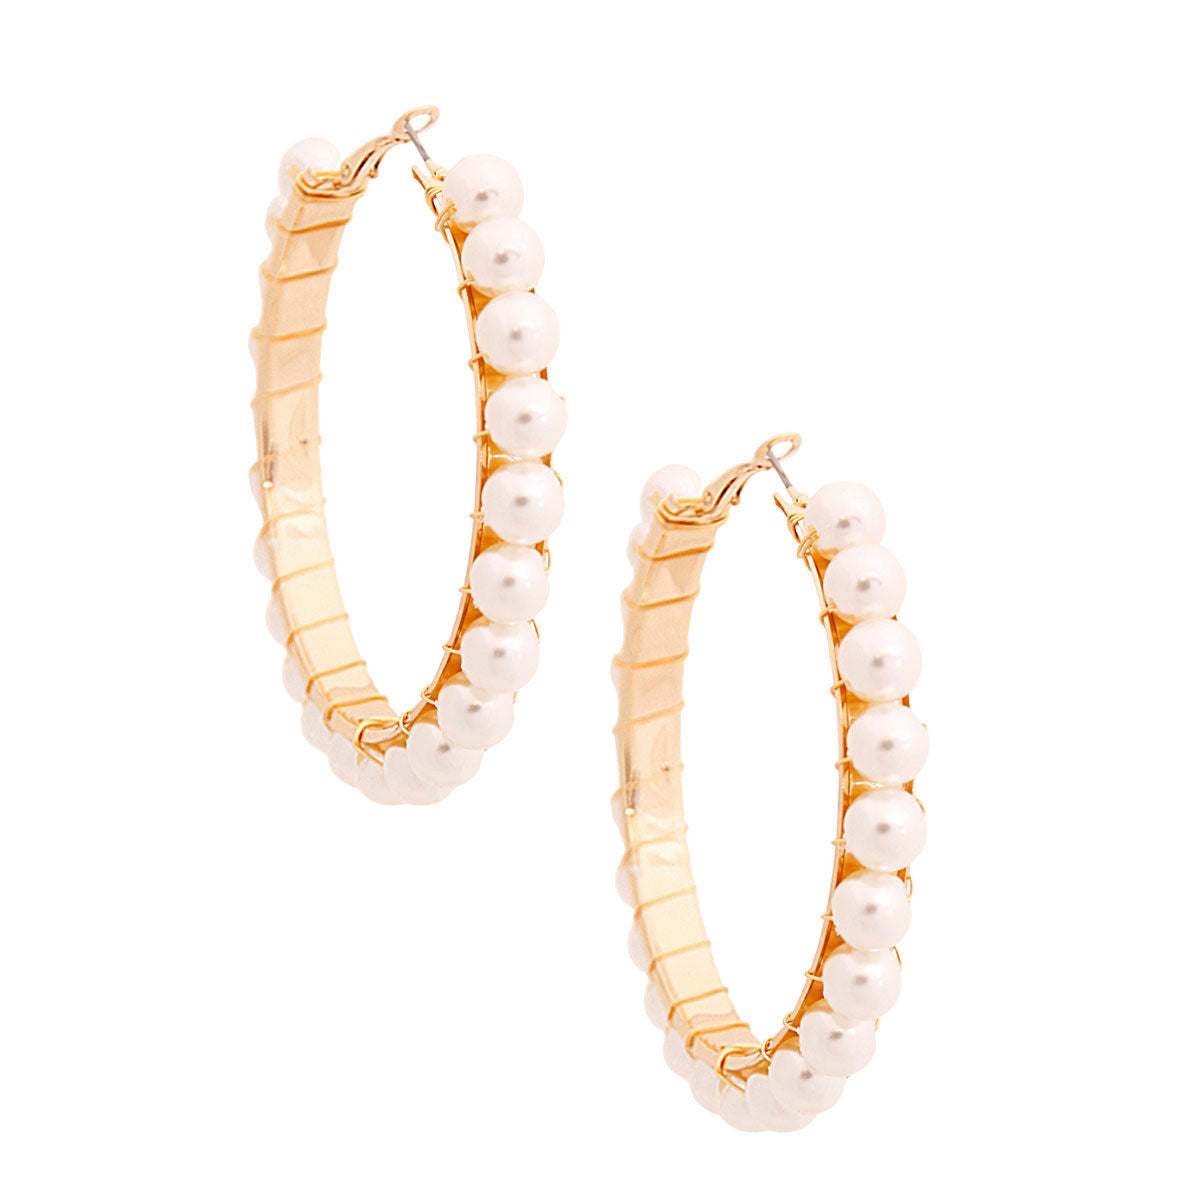 Cream Wire Wrapped Hoops